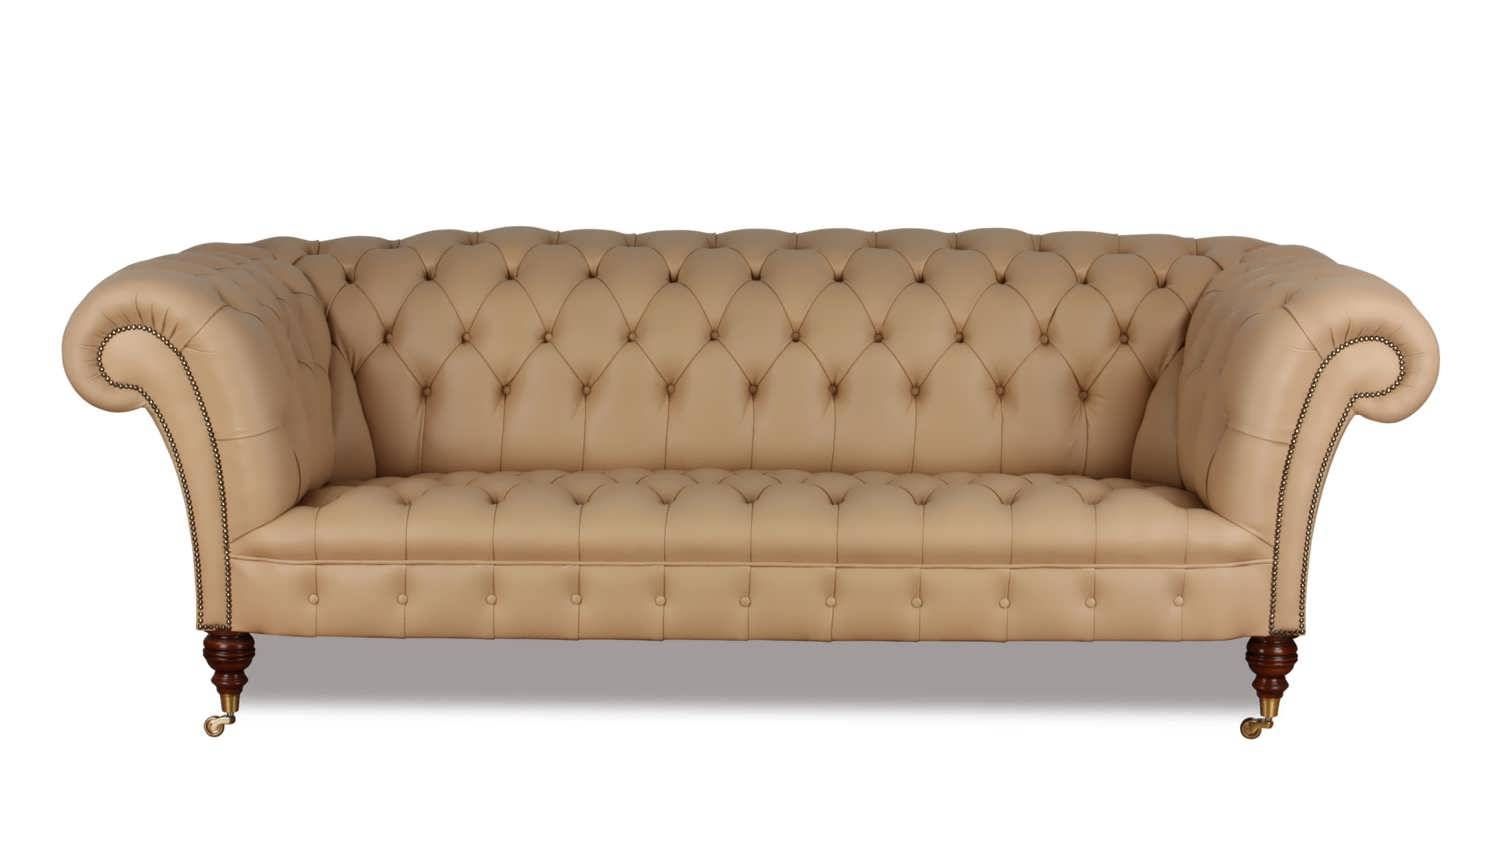 Sofa : Short Couch Traditional Armchairs For Living Room Brown Inside Brocade Sofas (View 6 of 15)